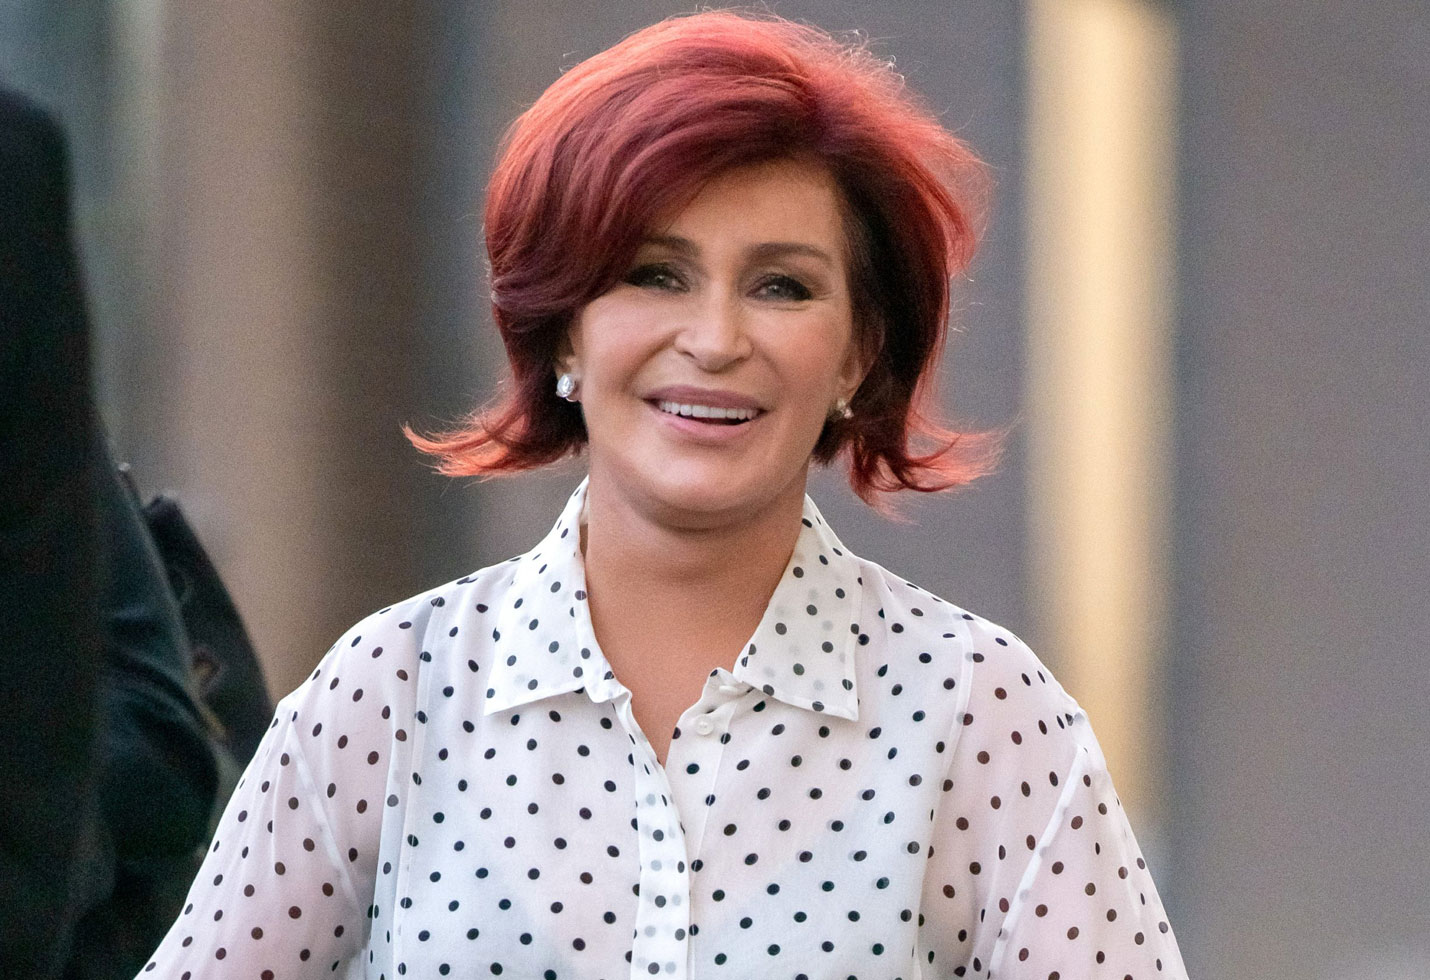 Sharon Osbourne Makes Fun Of Bad Facelifts After Her Surgery.